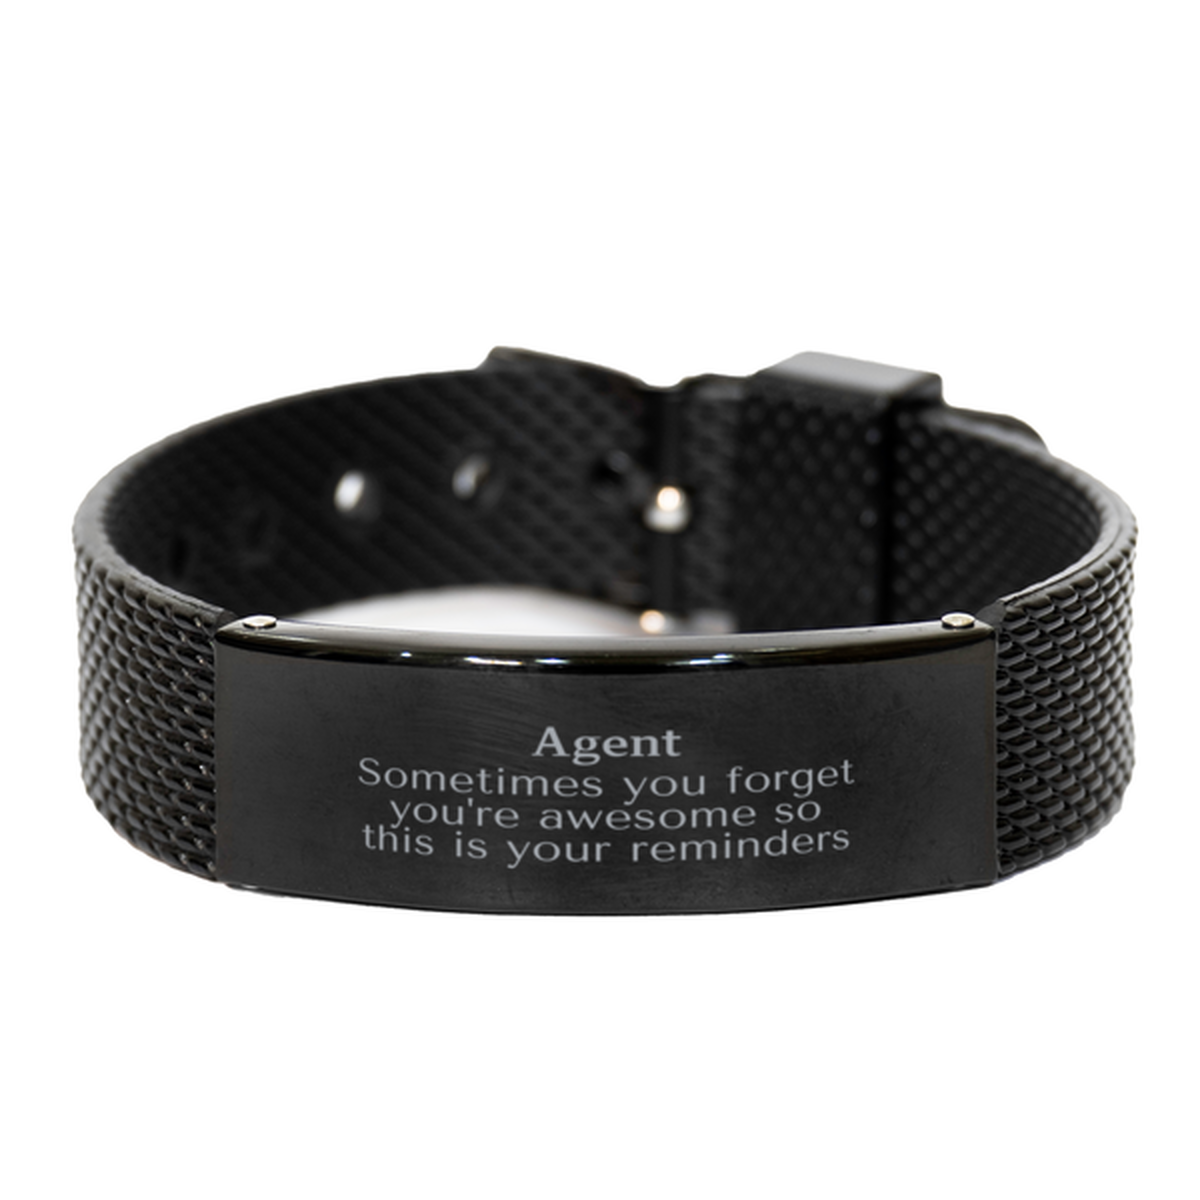 Sentimental Agent Black Shark Mesh Bracelet, Agent Sometimes you forget you're awesome so this is your reminders, Graduation Christmas Birthday Gifts for Agent, Men, Women, Coworkers